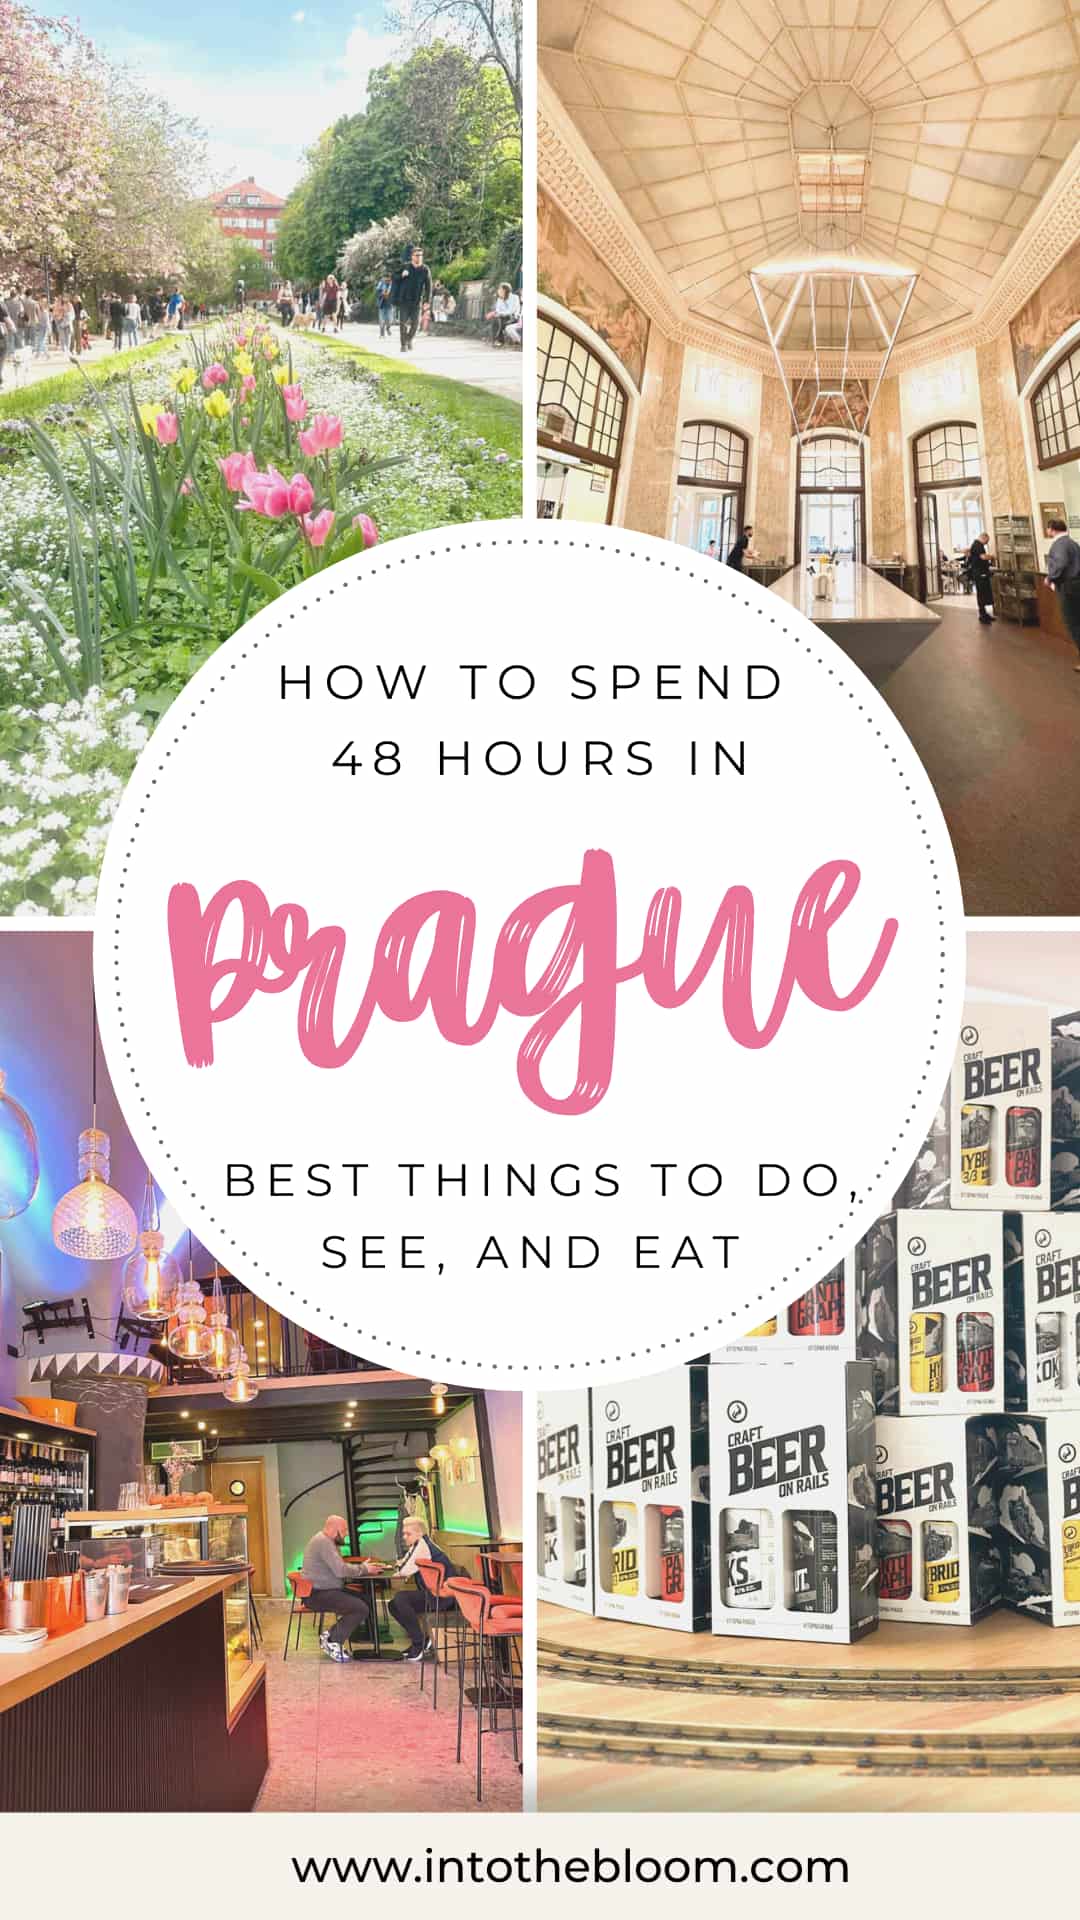 How to spend 48 hours in Prague - best things to do, see, and eat - Prague travel guide